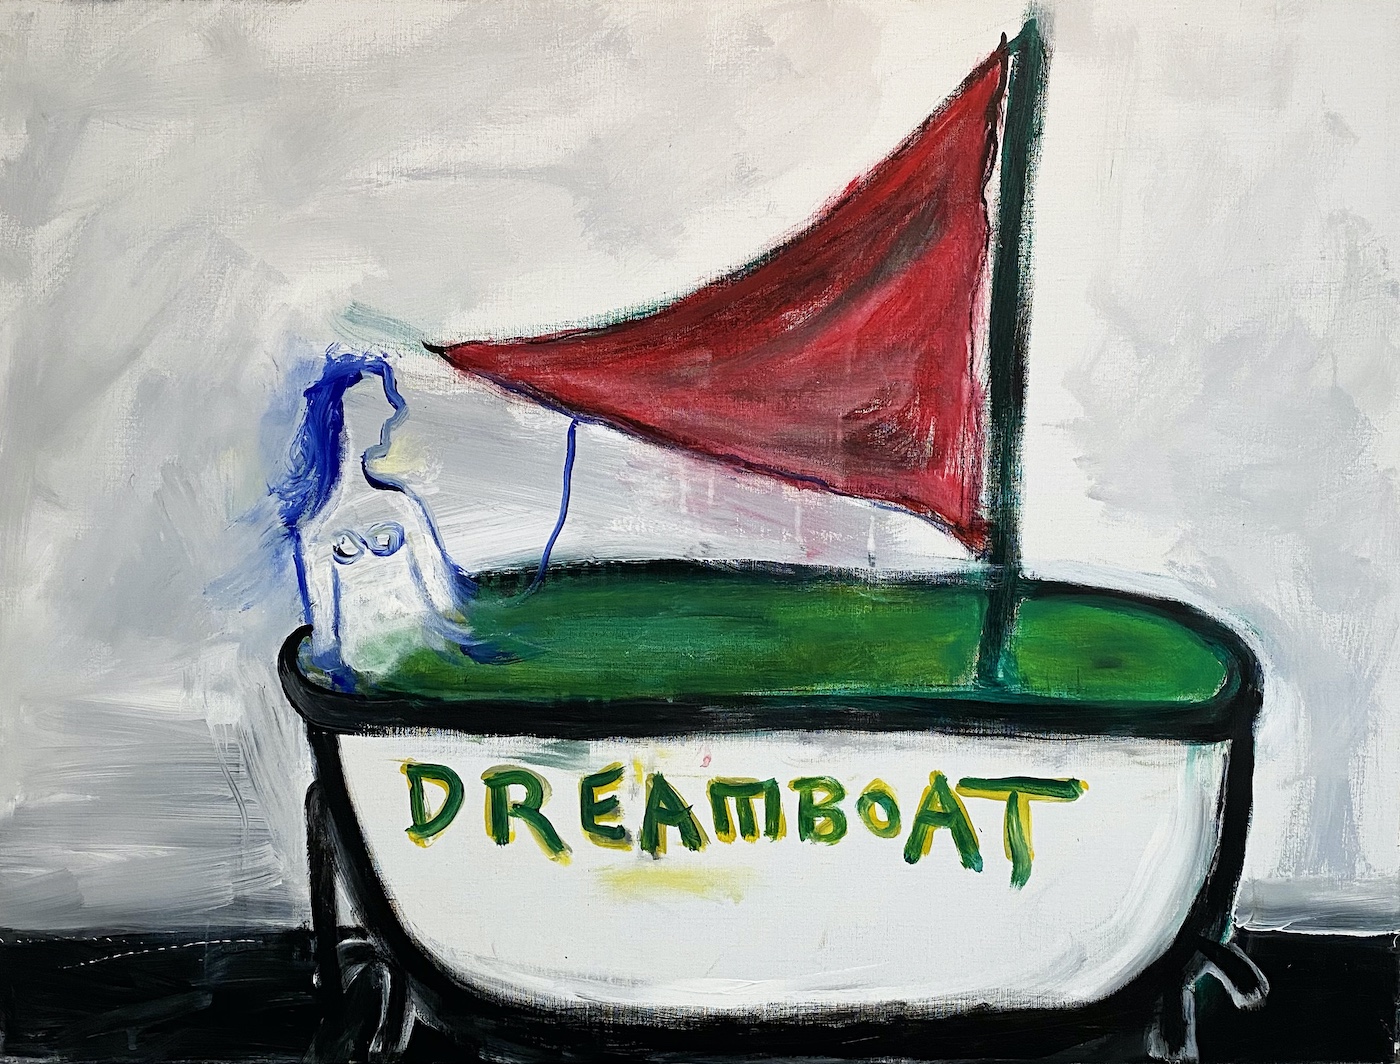 Lawrence Ferlinghetti, “Dreamboat” (2006), oil and acrylic on canvas, 30 x 40 inches